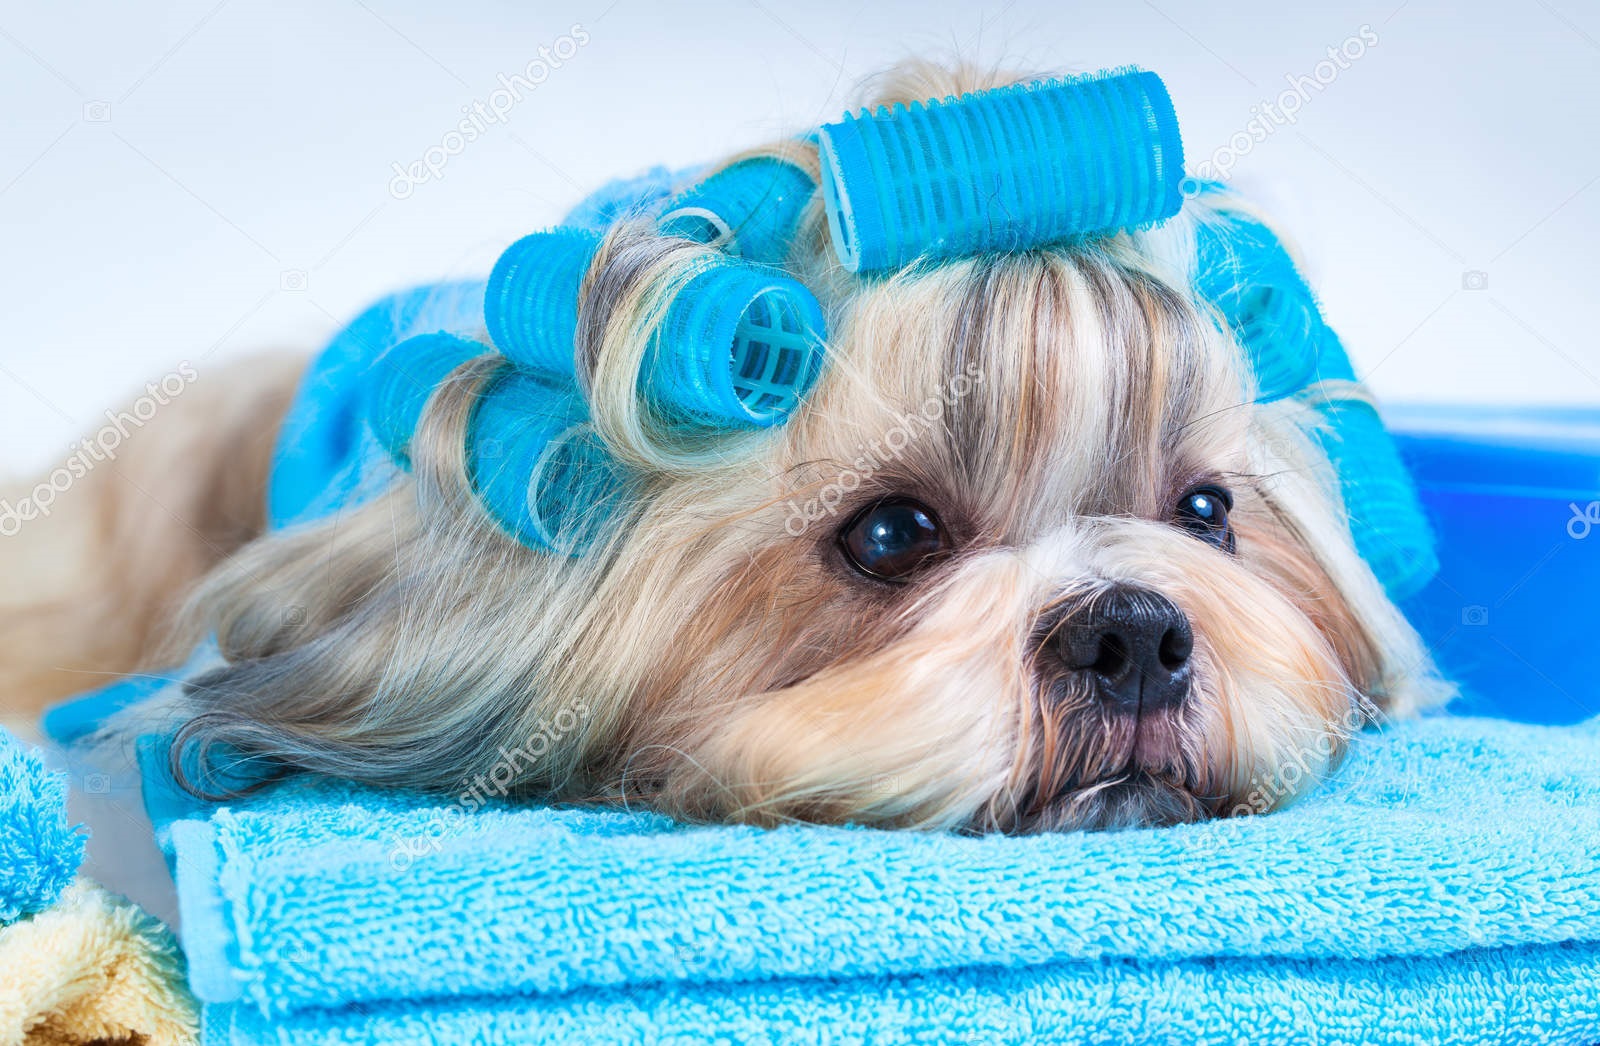 Shih tzu dog after washing. With curlers and towels. On white background.